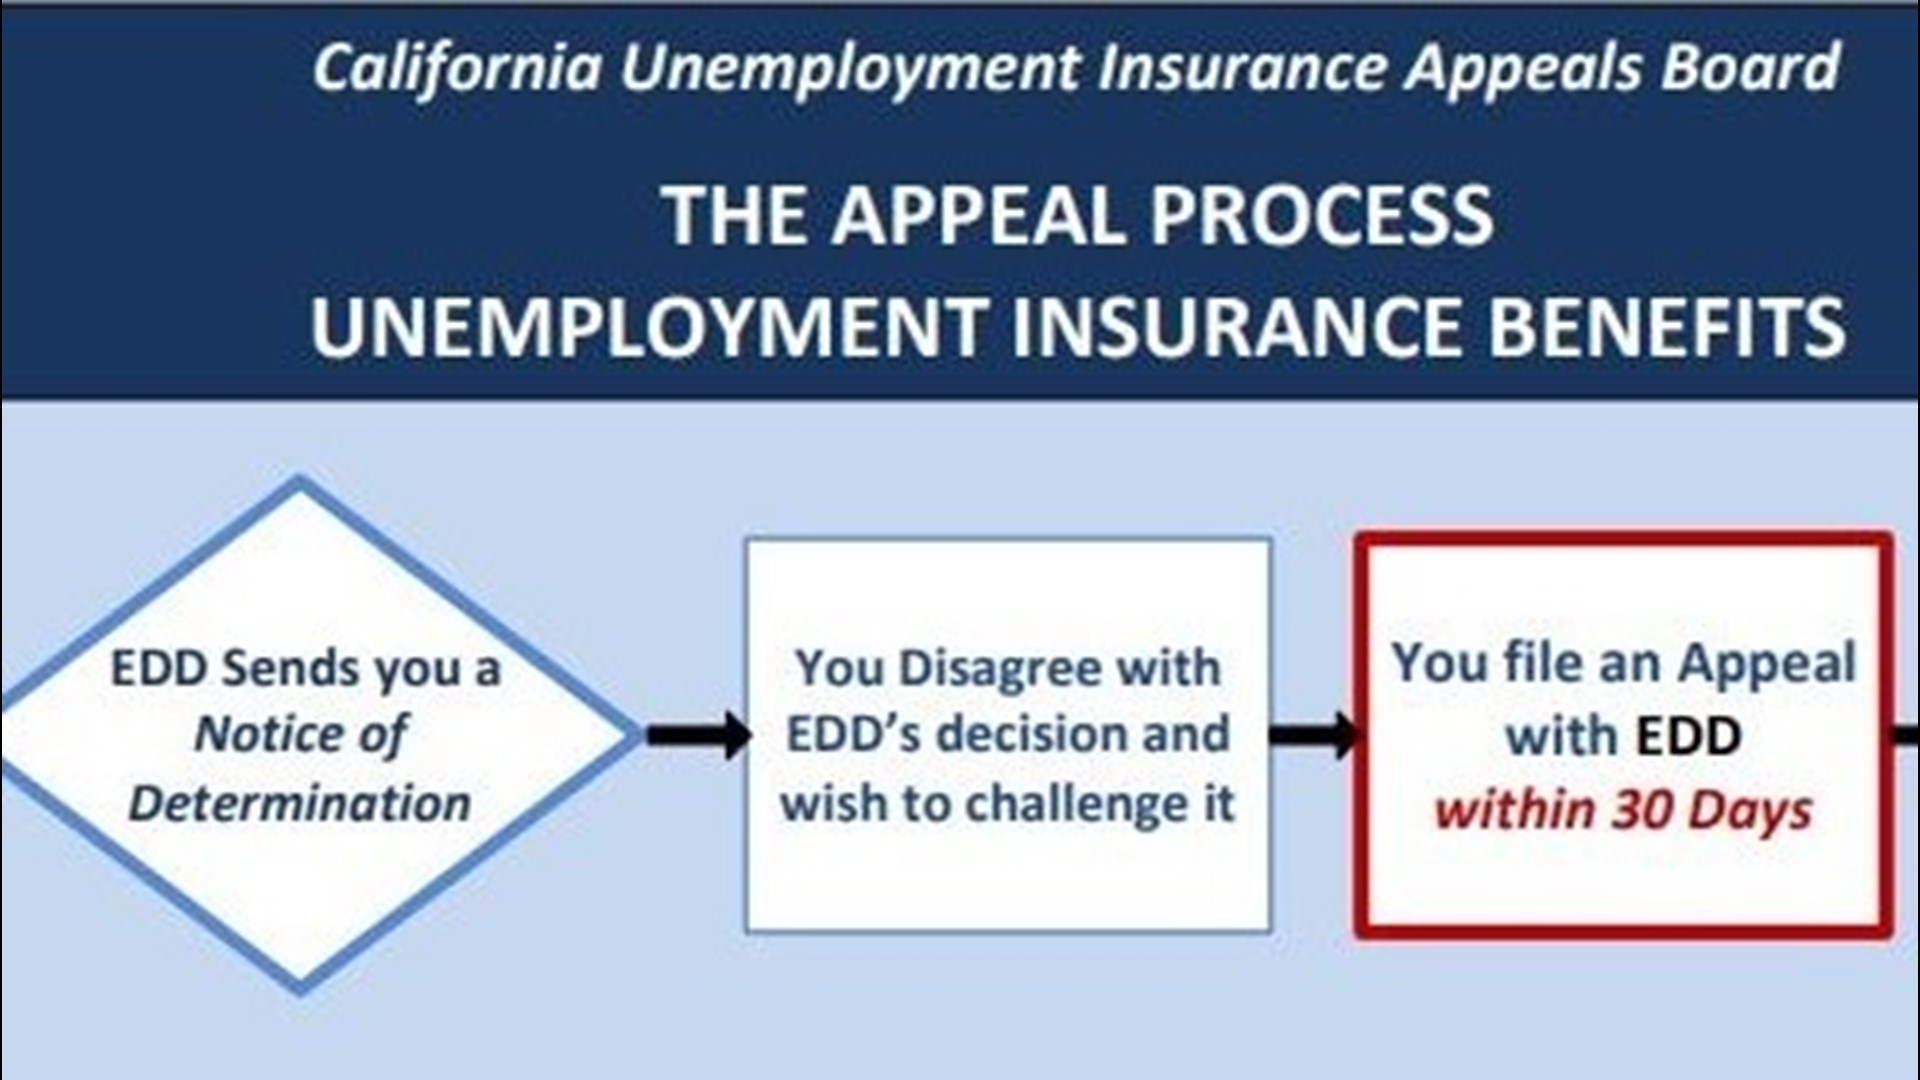 If you have been denied your unemployment benefits by EDD, there’s a chance you can get them if you appeal.